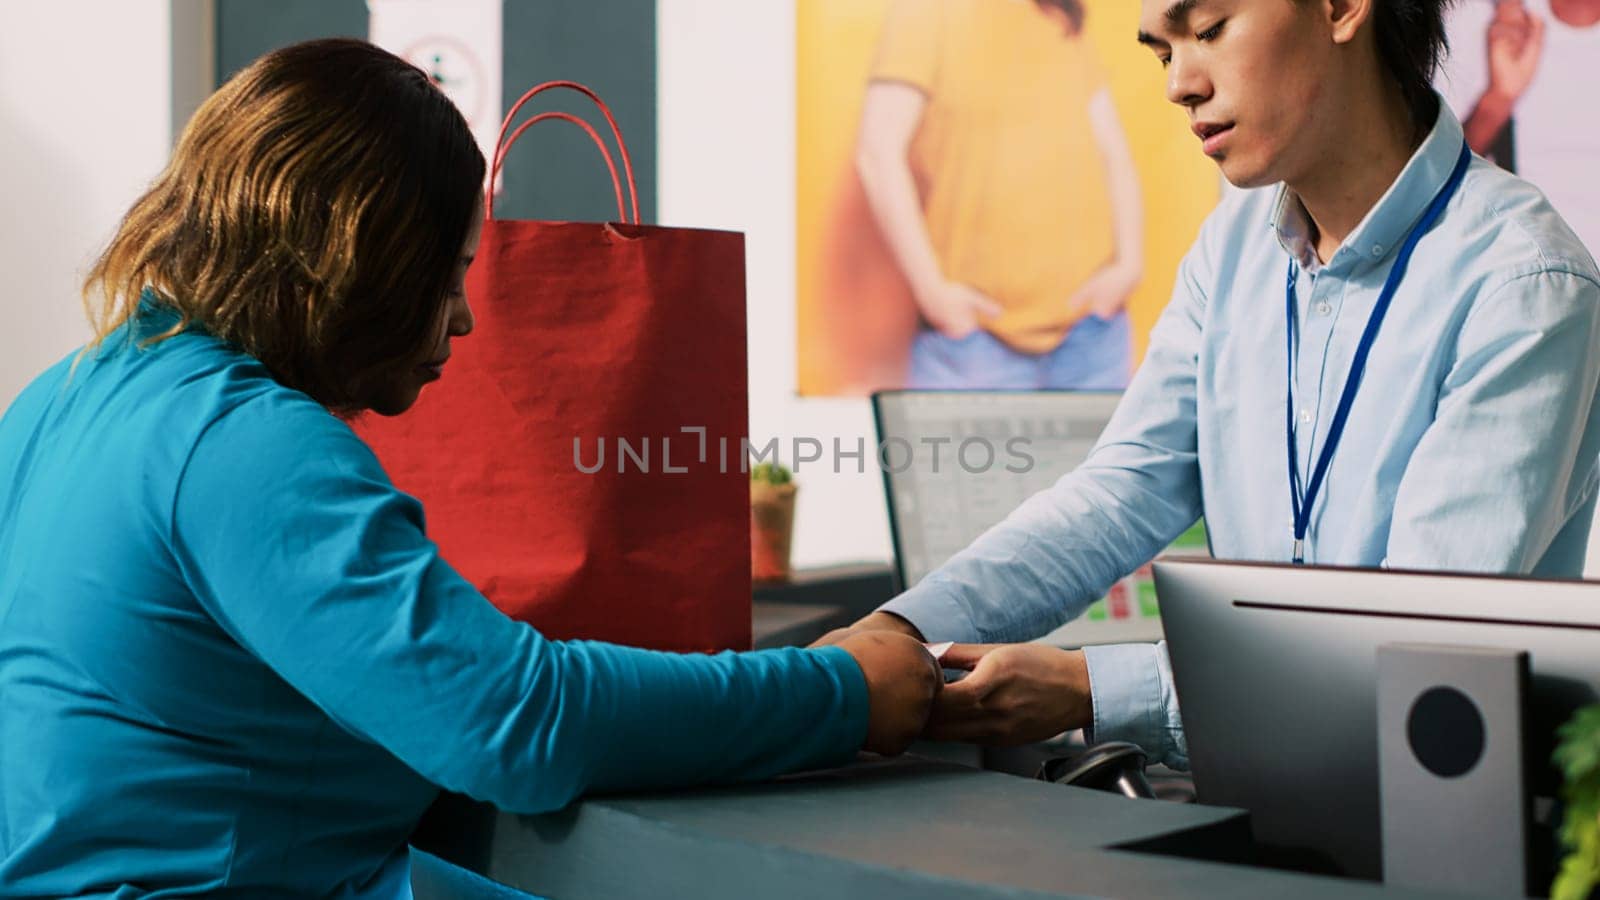 Worker giving bag to shopaholic customer by DCStudio